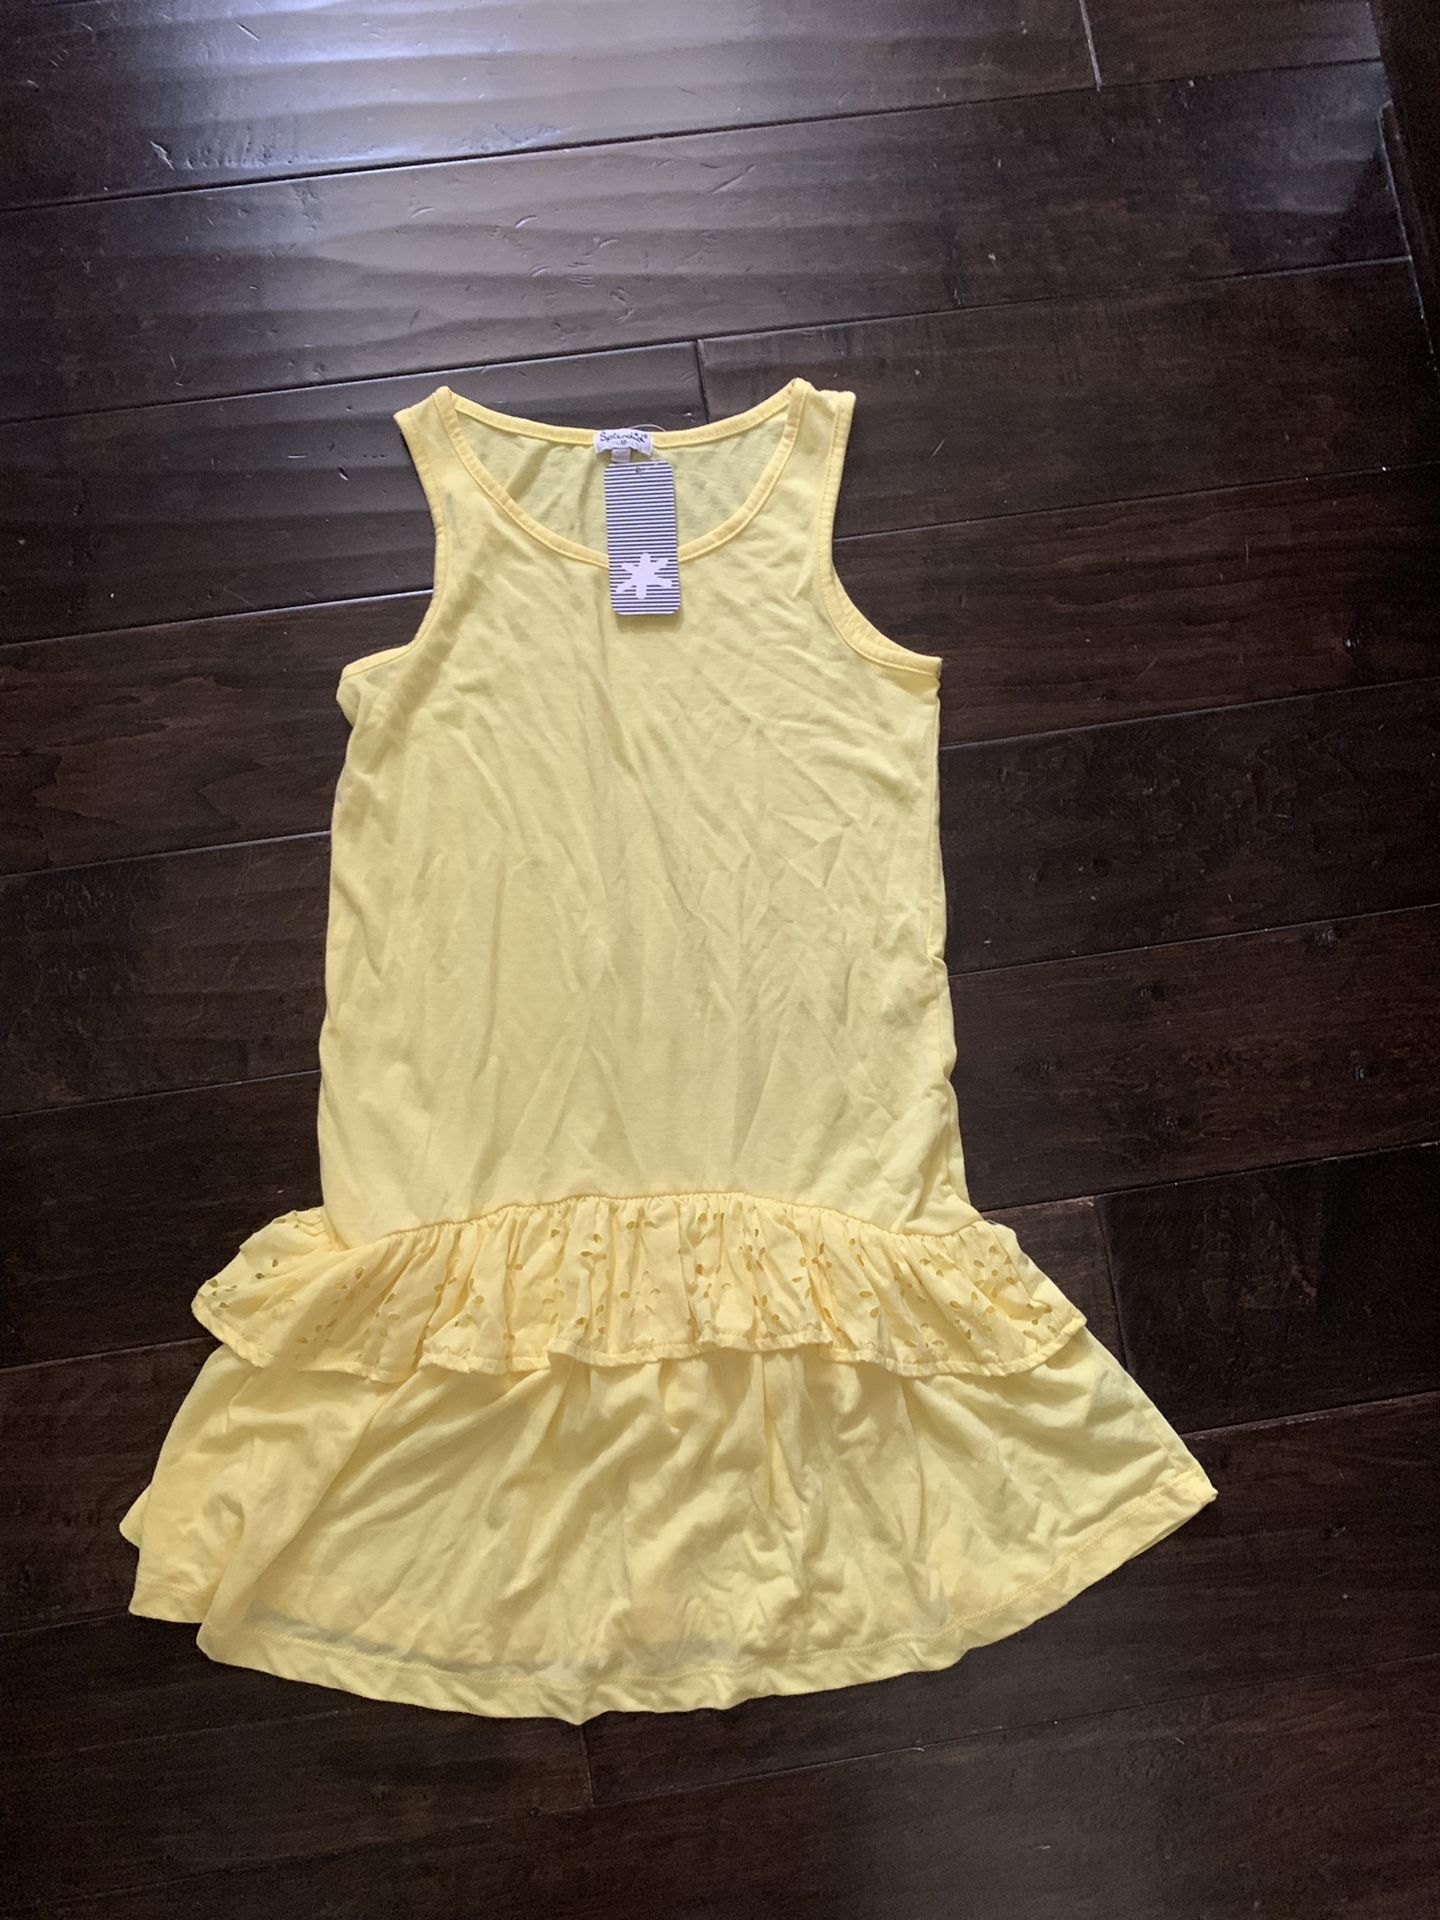 New with tags Splendid girls size 12 dress